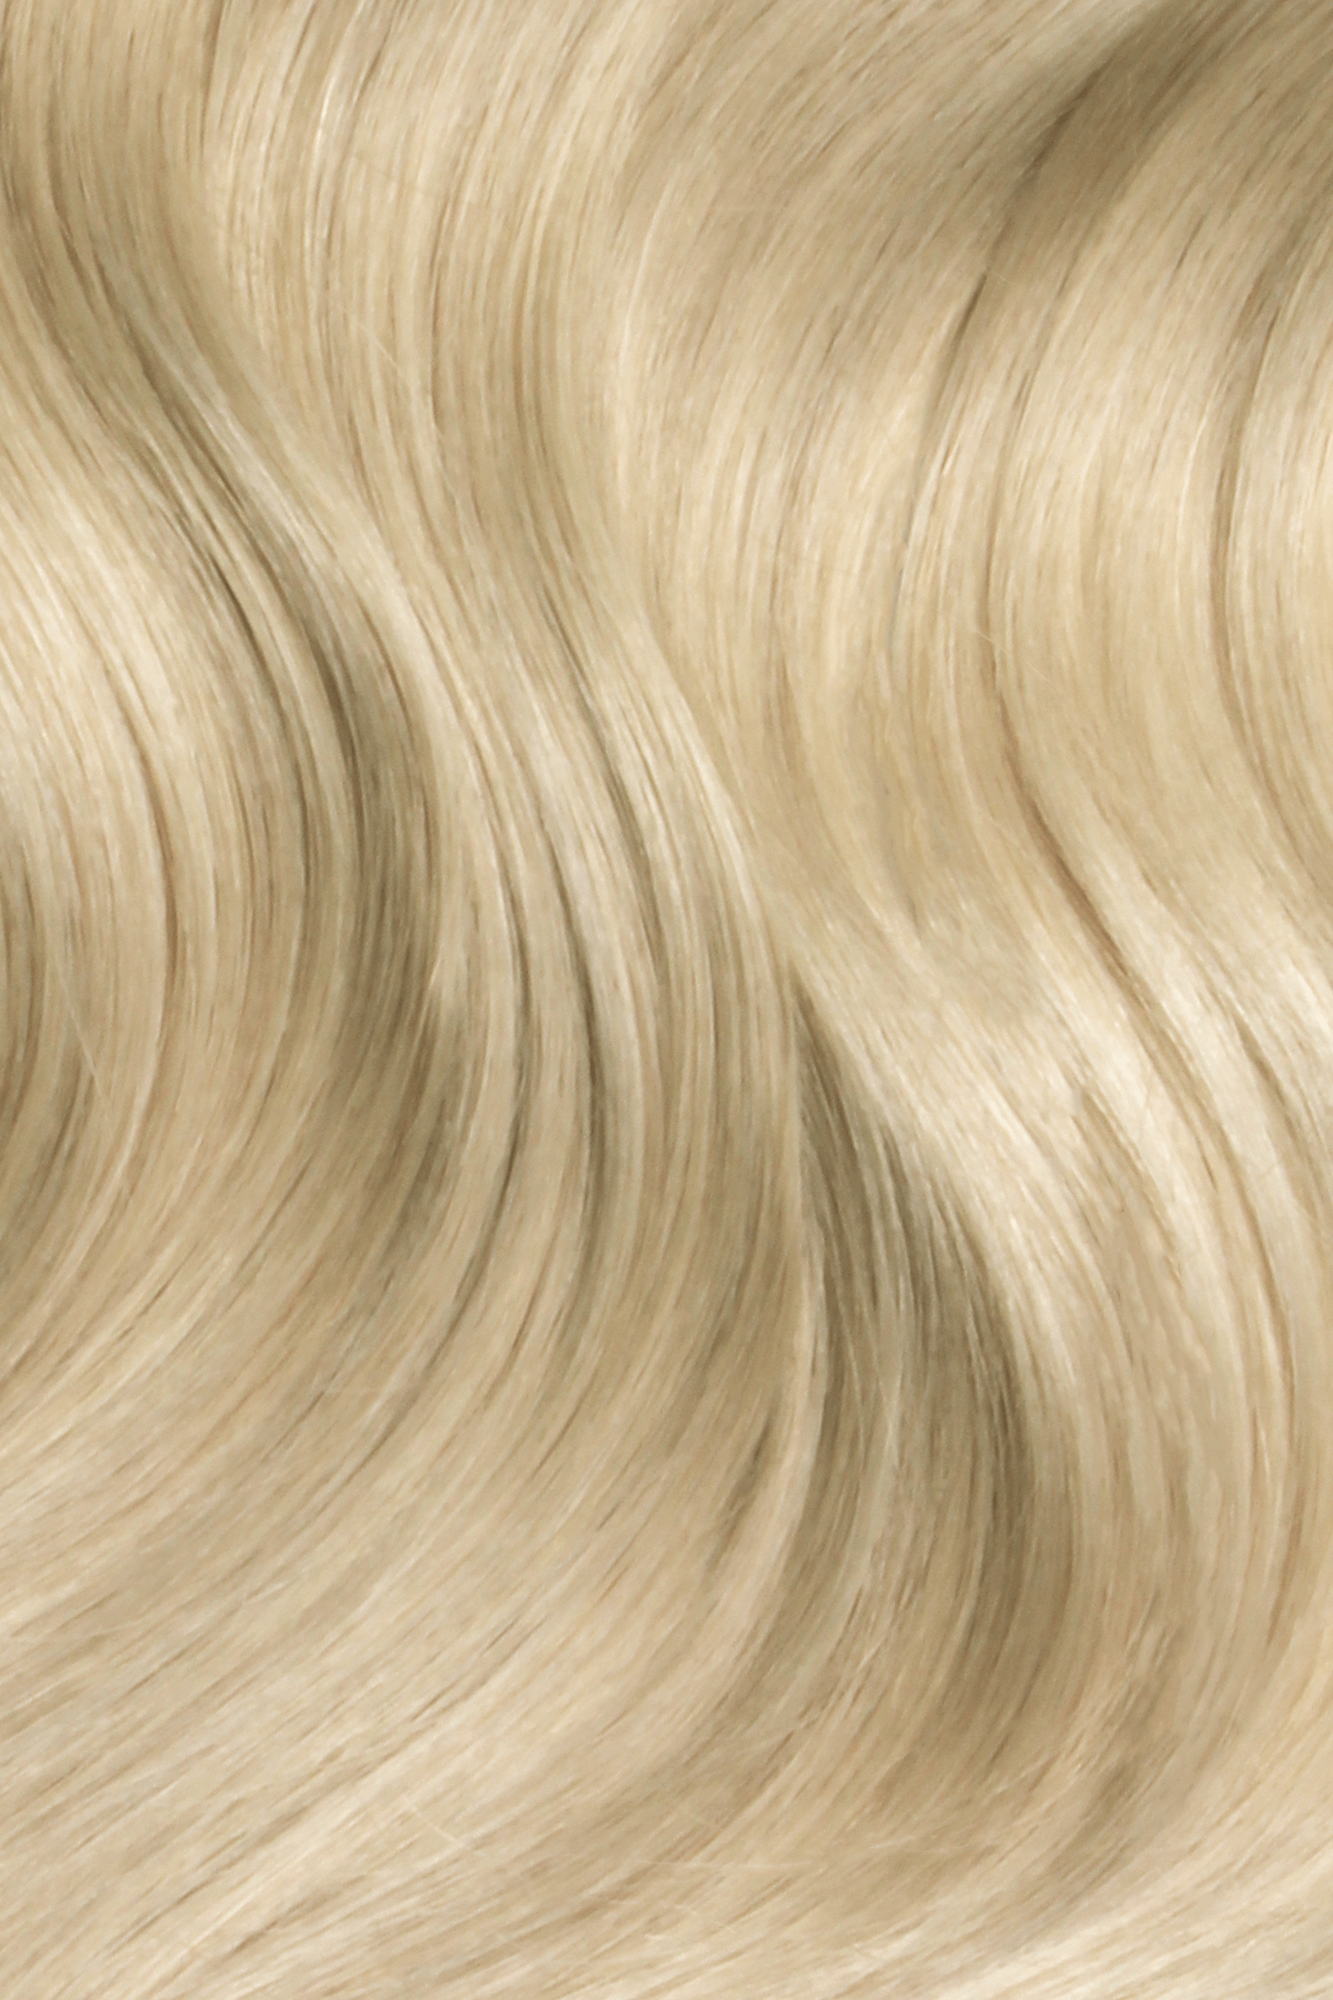 SEAMLESS® Tapes 20 Inches - SWAY Hair Extensions Hollywood-Ash-Blonde-18A-613A clip-in hair extensions made of 100% Double Drawn, Remy Human Hair. SWAY SEAMLESS® Tapes, 20 inches. Lightweight, flexible, and perfect for any hairstyle.